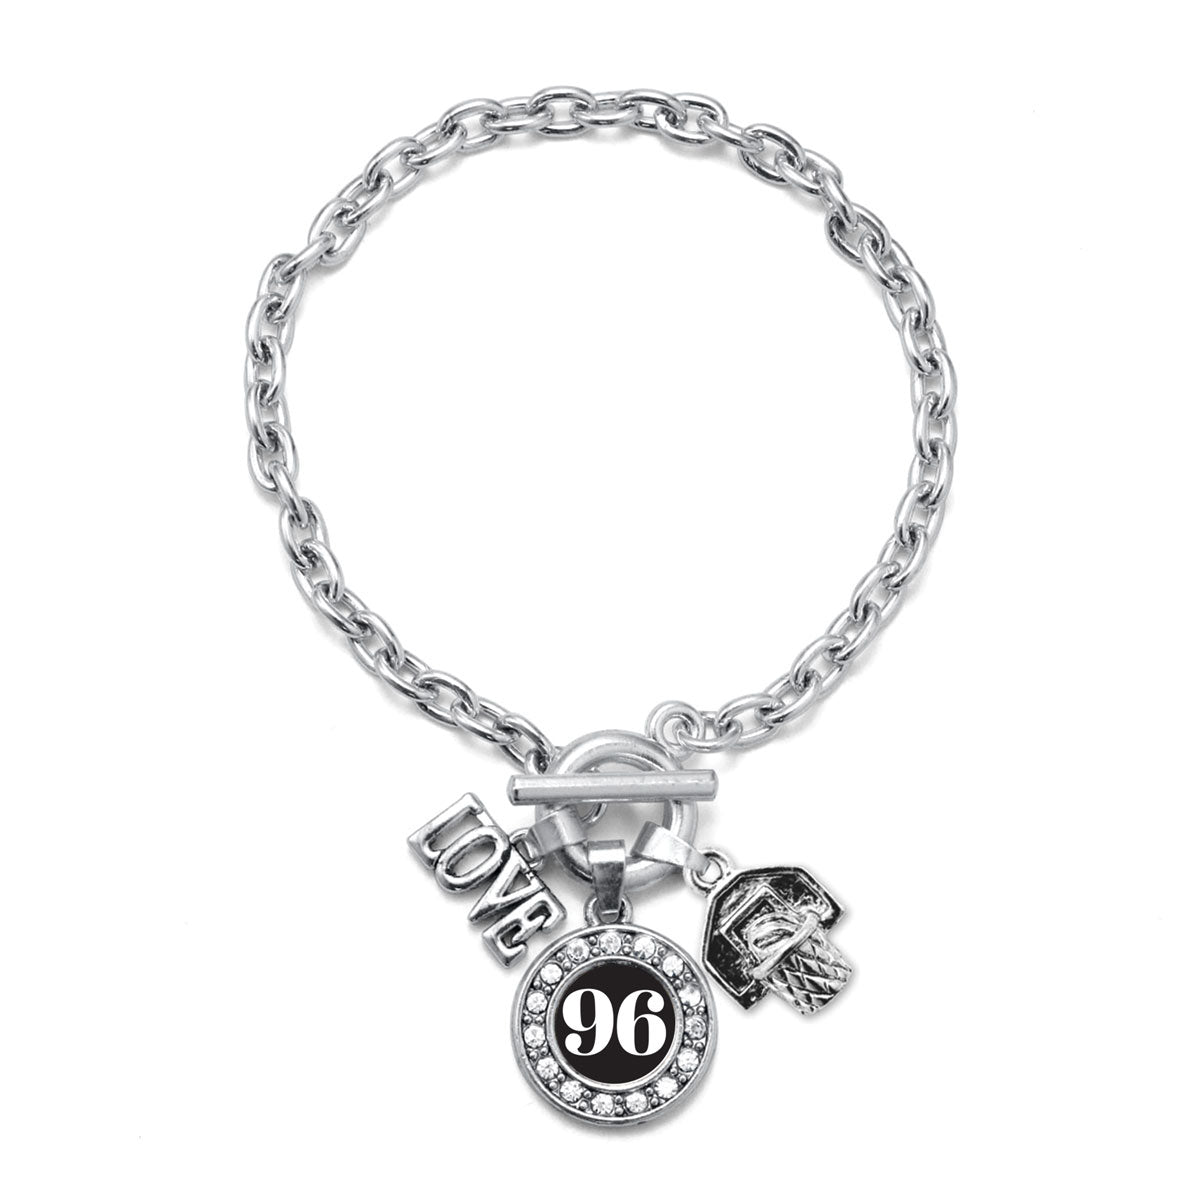 Silver Basketball Hoop - Sports Number 96 Circle Charm Toggle Bracelet